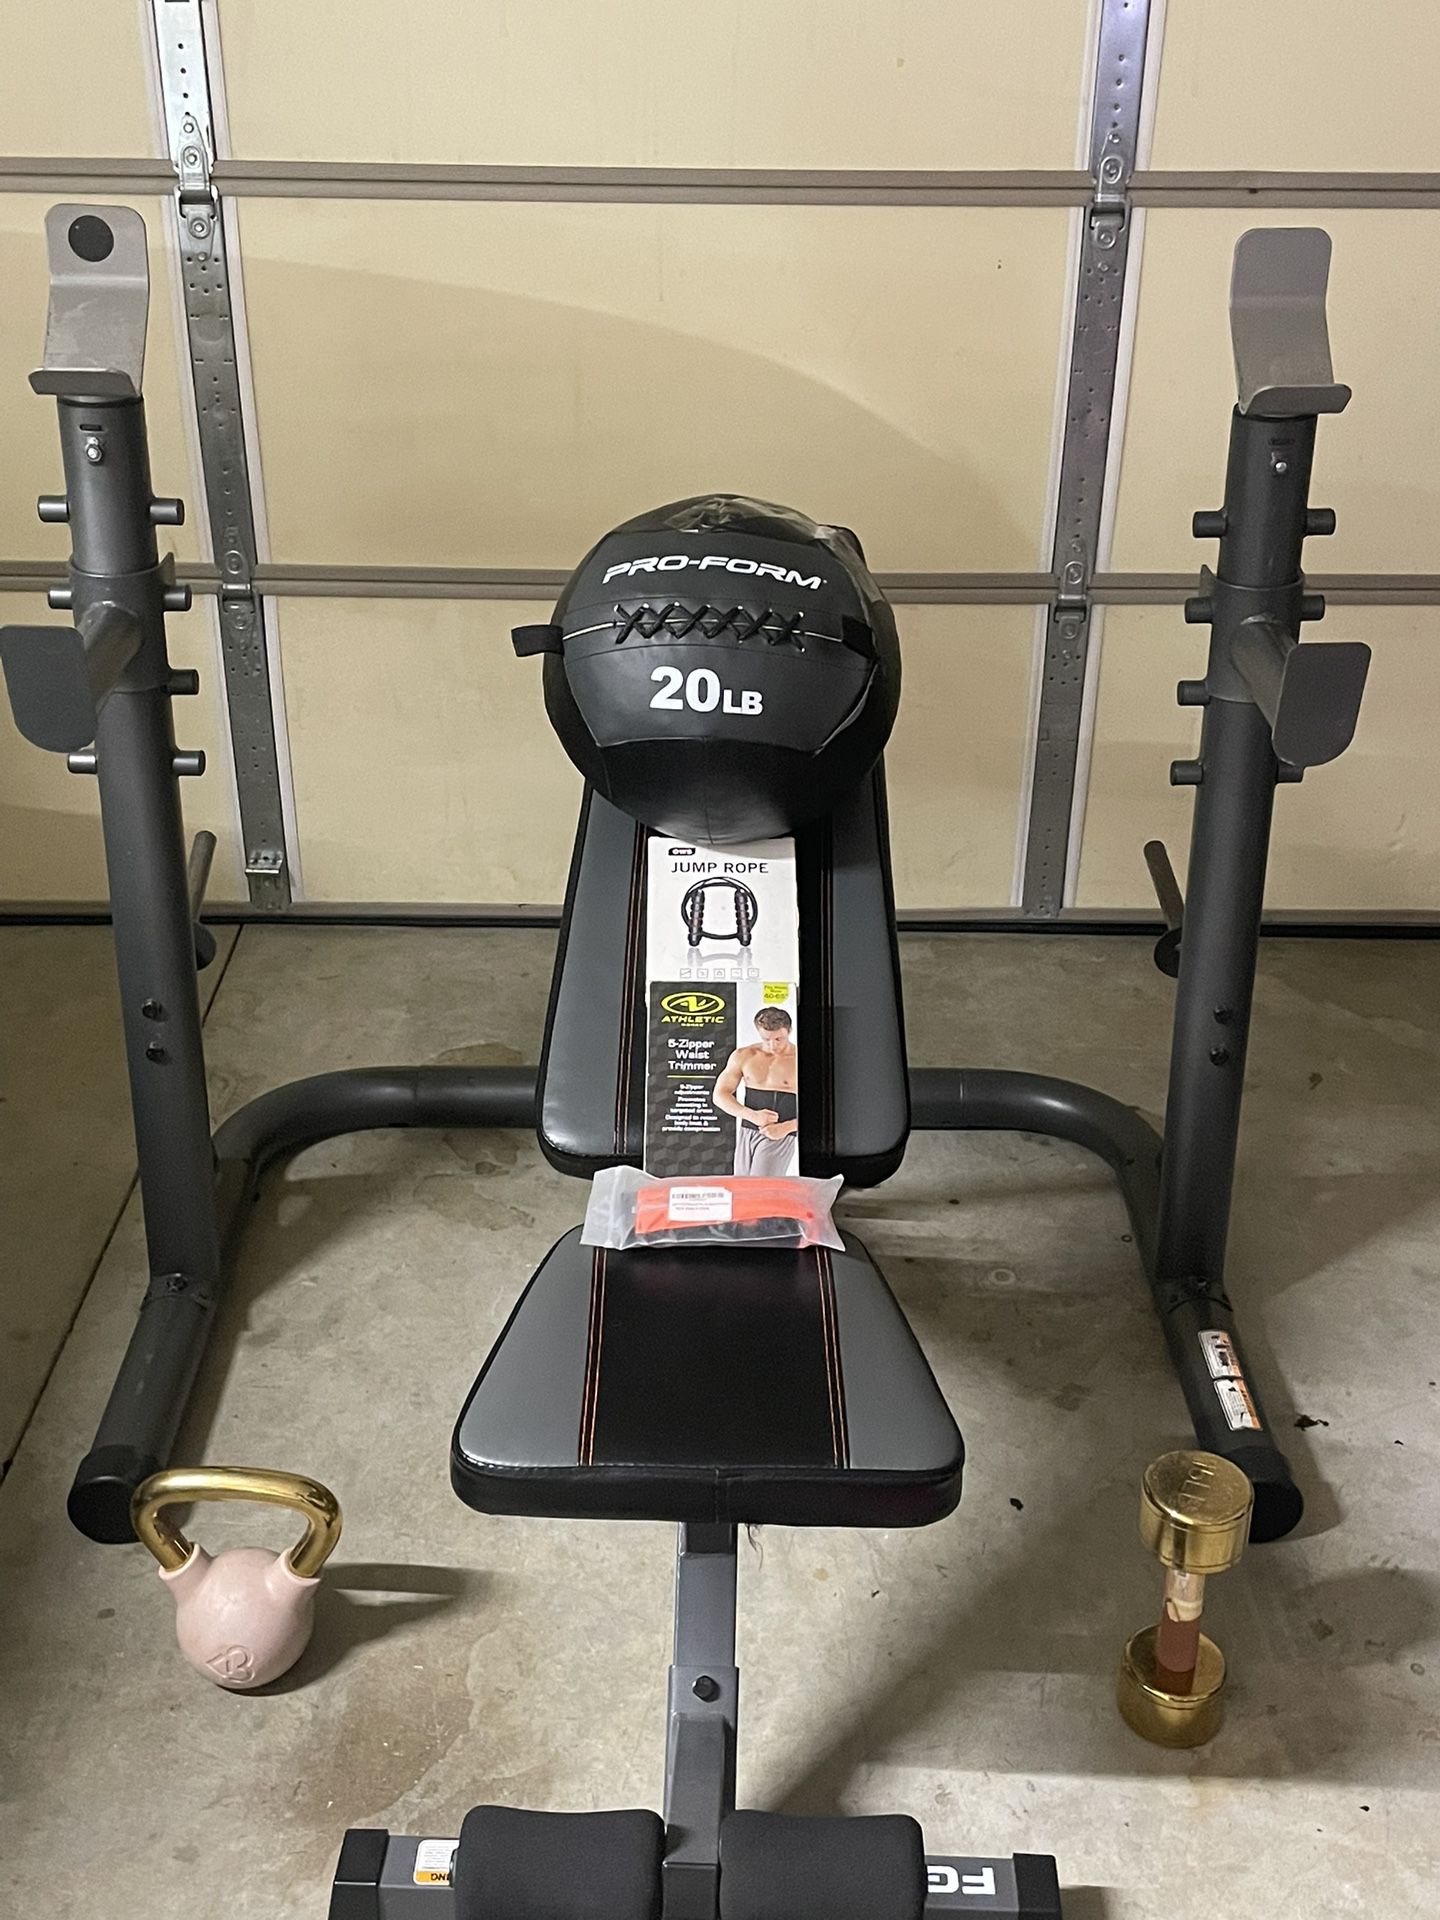 Adjustable Squat Rack Plus Adjustable Bench 20lb Weight Ball One 15lb Kettlebell One 15lb Dumbbell one jump rope one waist trimmer and one running bel